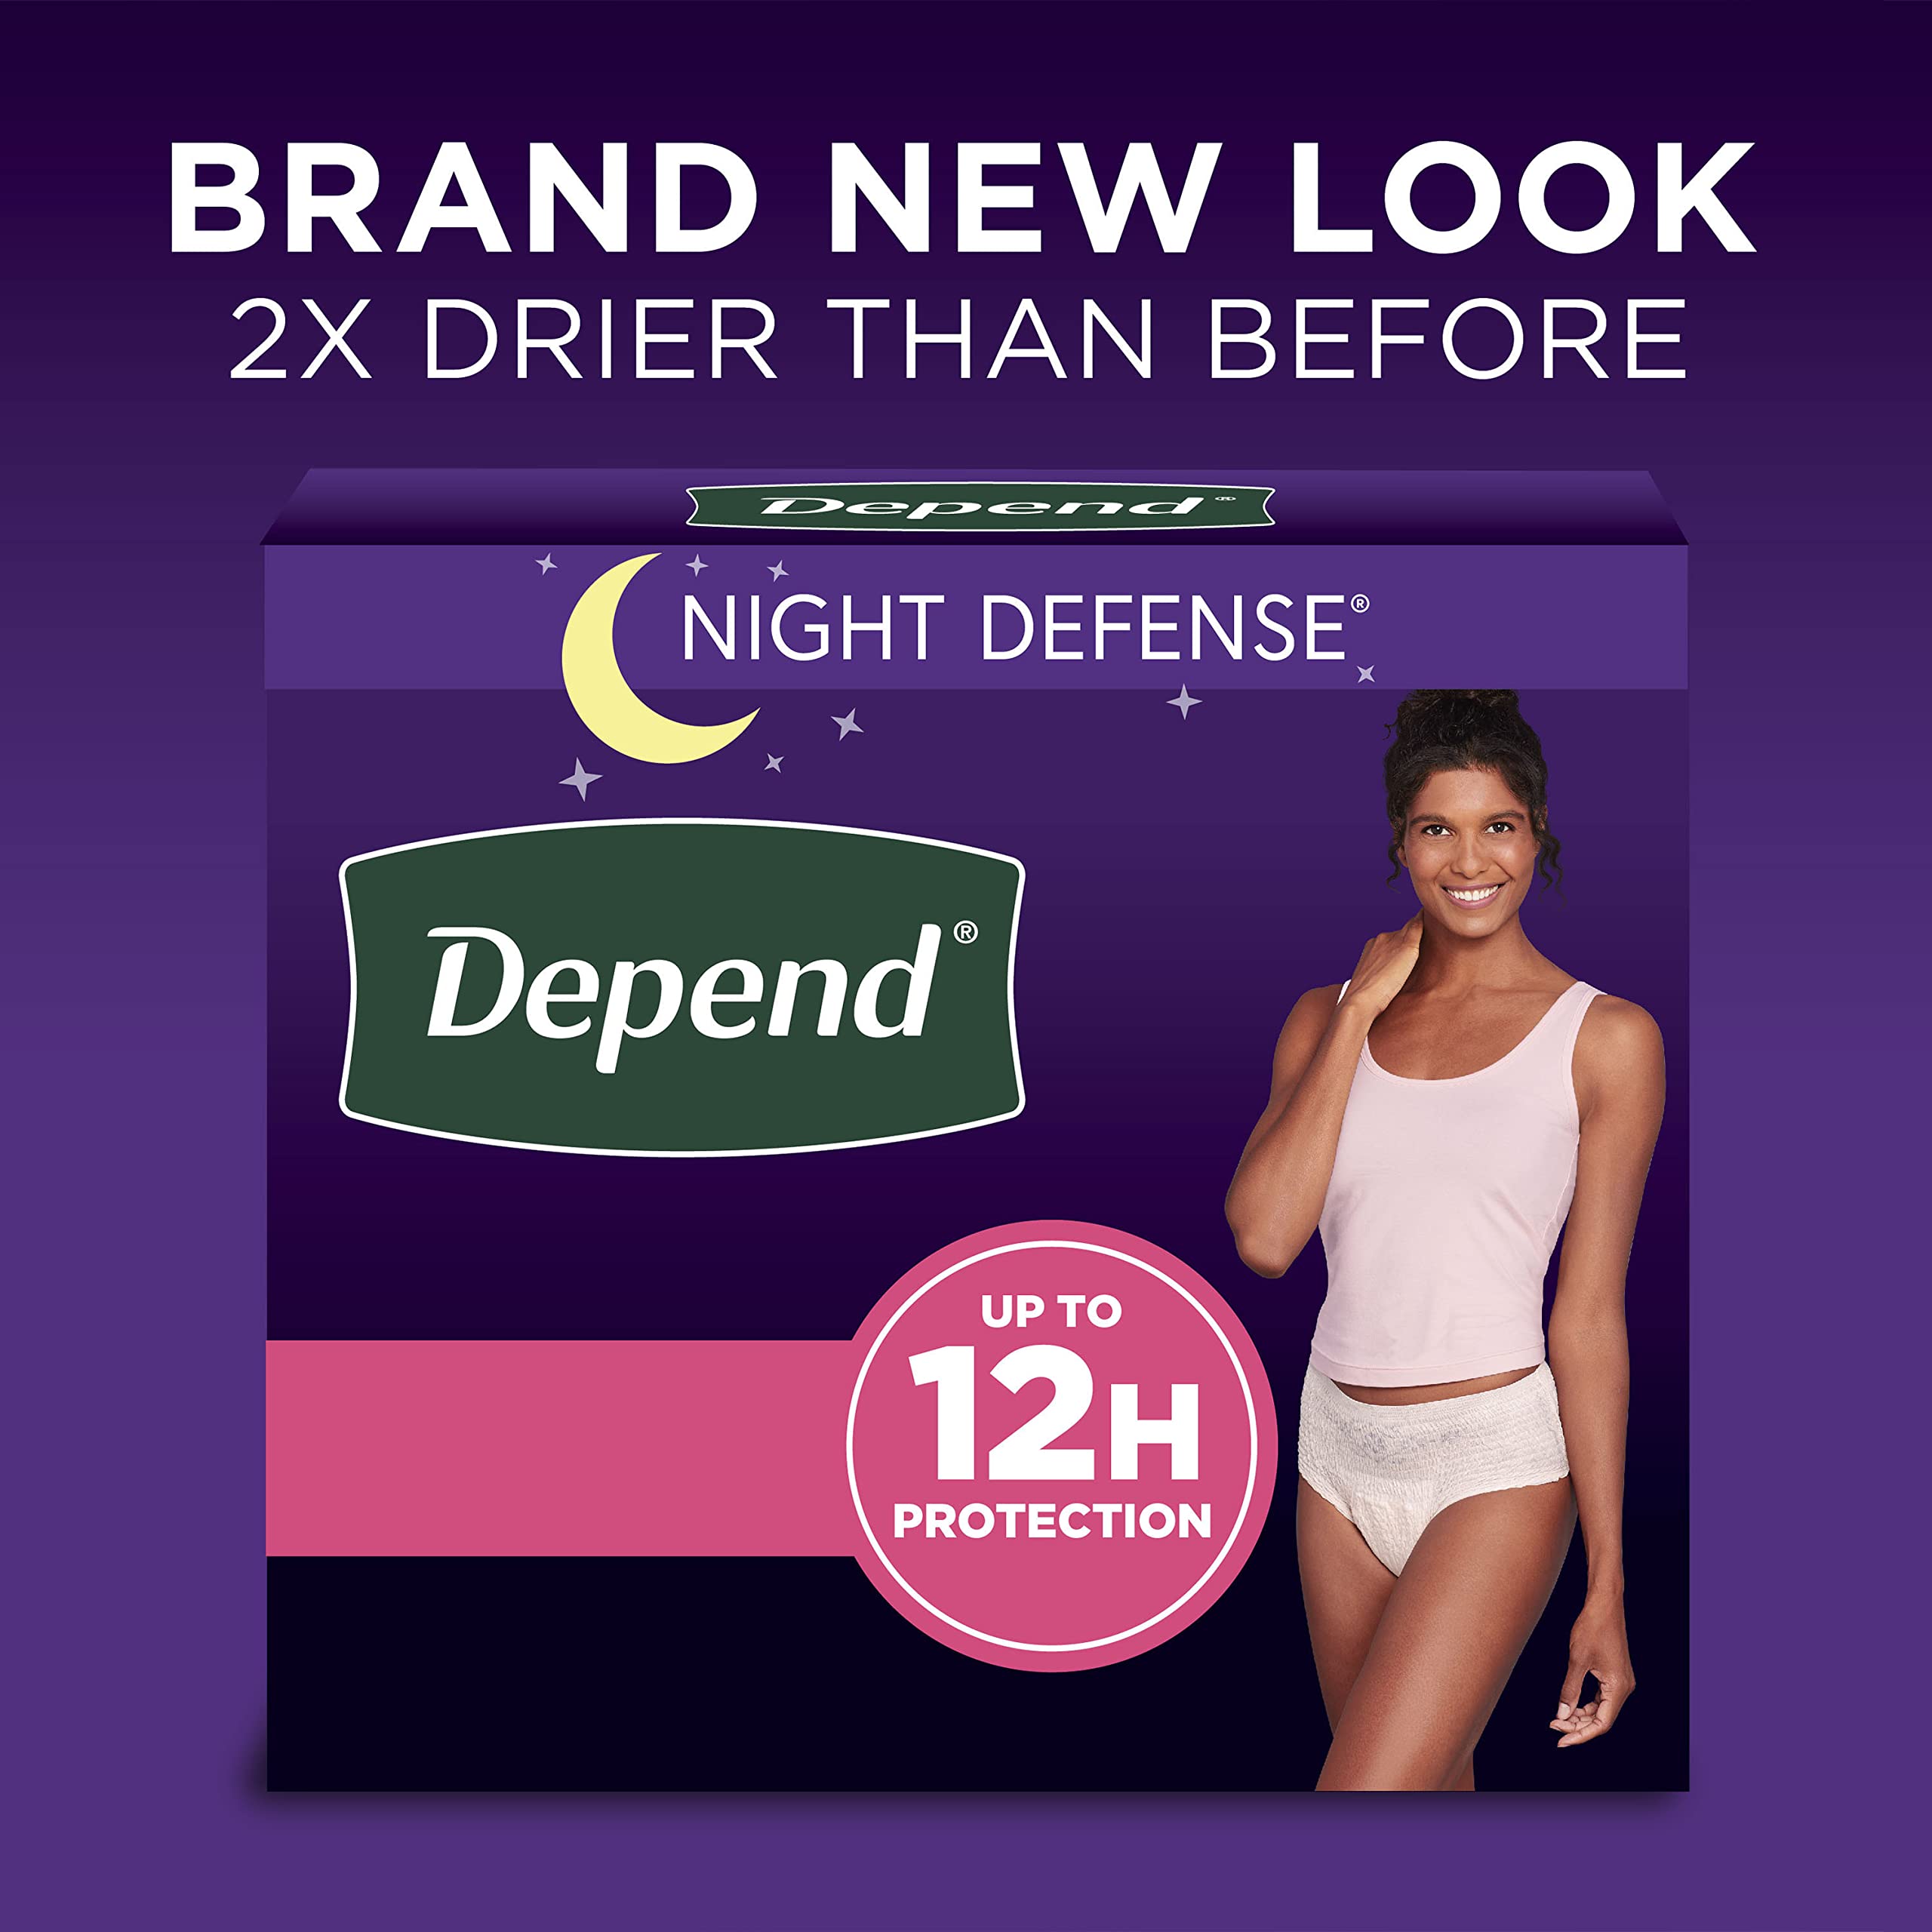 Depend Night Defense Adult Incontinence Underwear for Women, Disposable, Overnight, Medium, Blush, 60 Count, Packaging May Vary